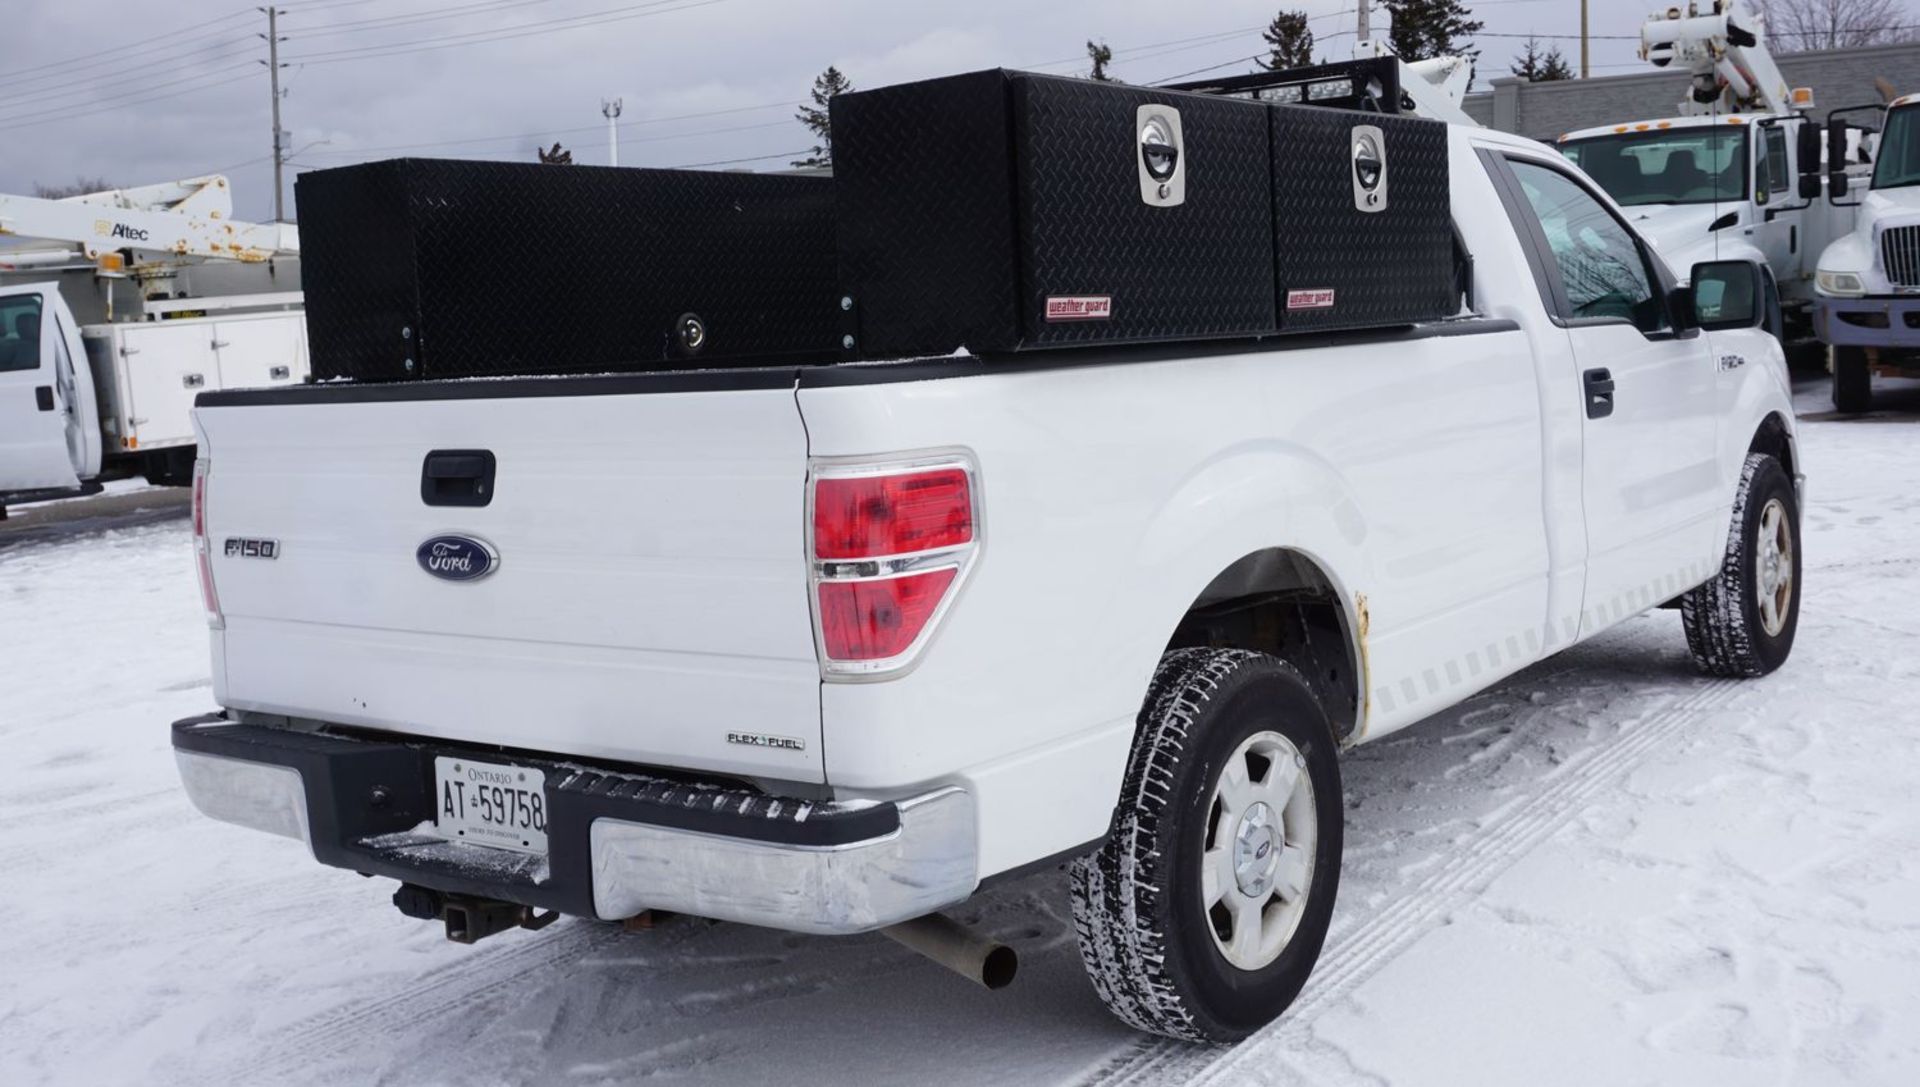 2014 FORD F150XL REG CAB 4X2 PICKUP W/ 5.0L V8 GAS ENGINE C/W (2) WEATHER GUARD HI-SIDE TOOL BOXES, - Image 5 of 8